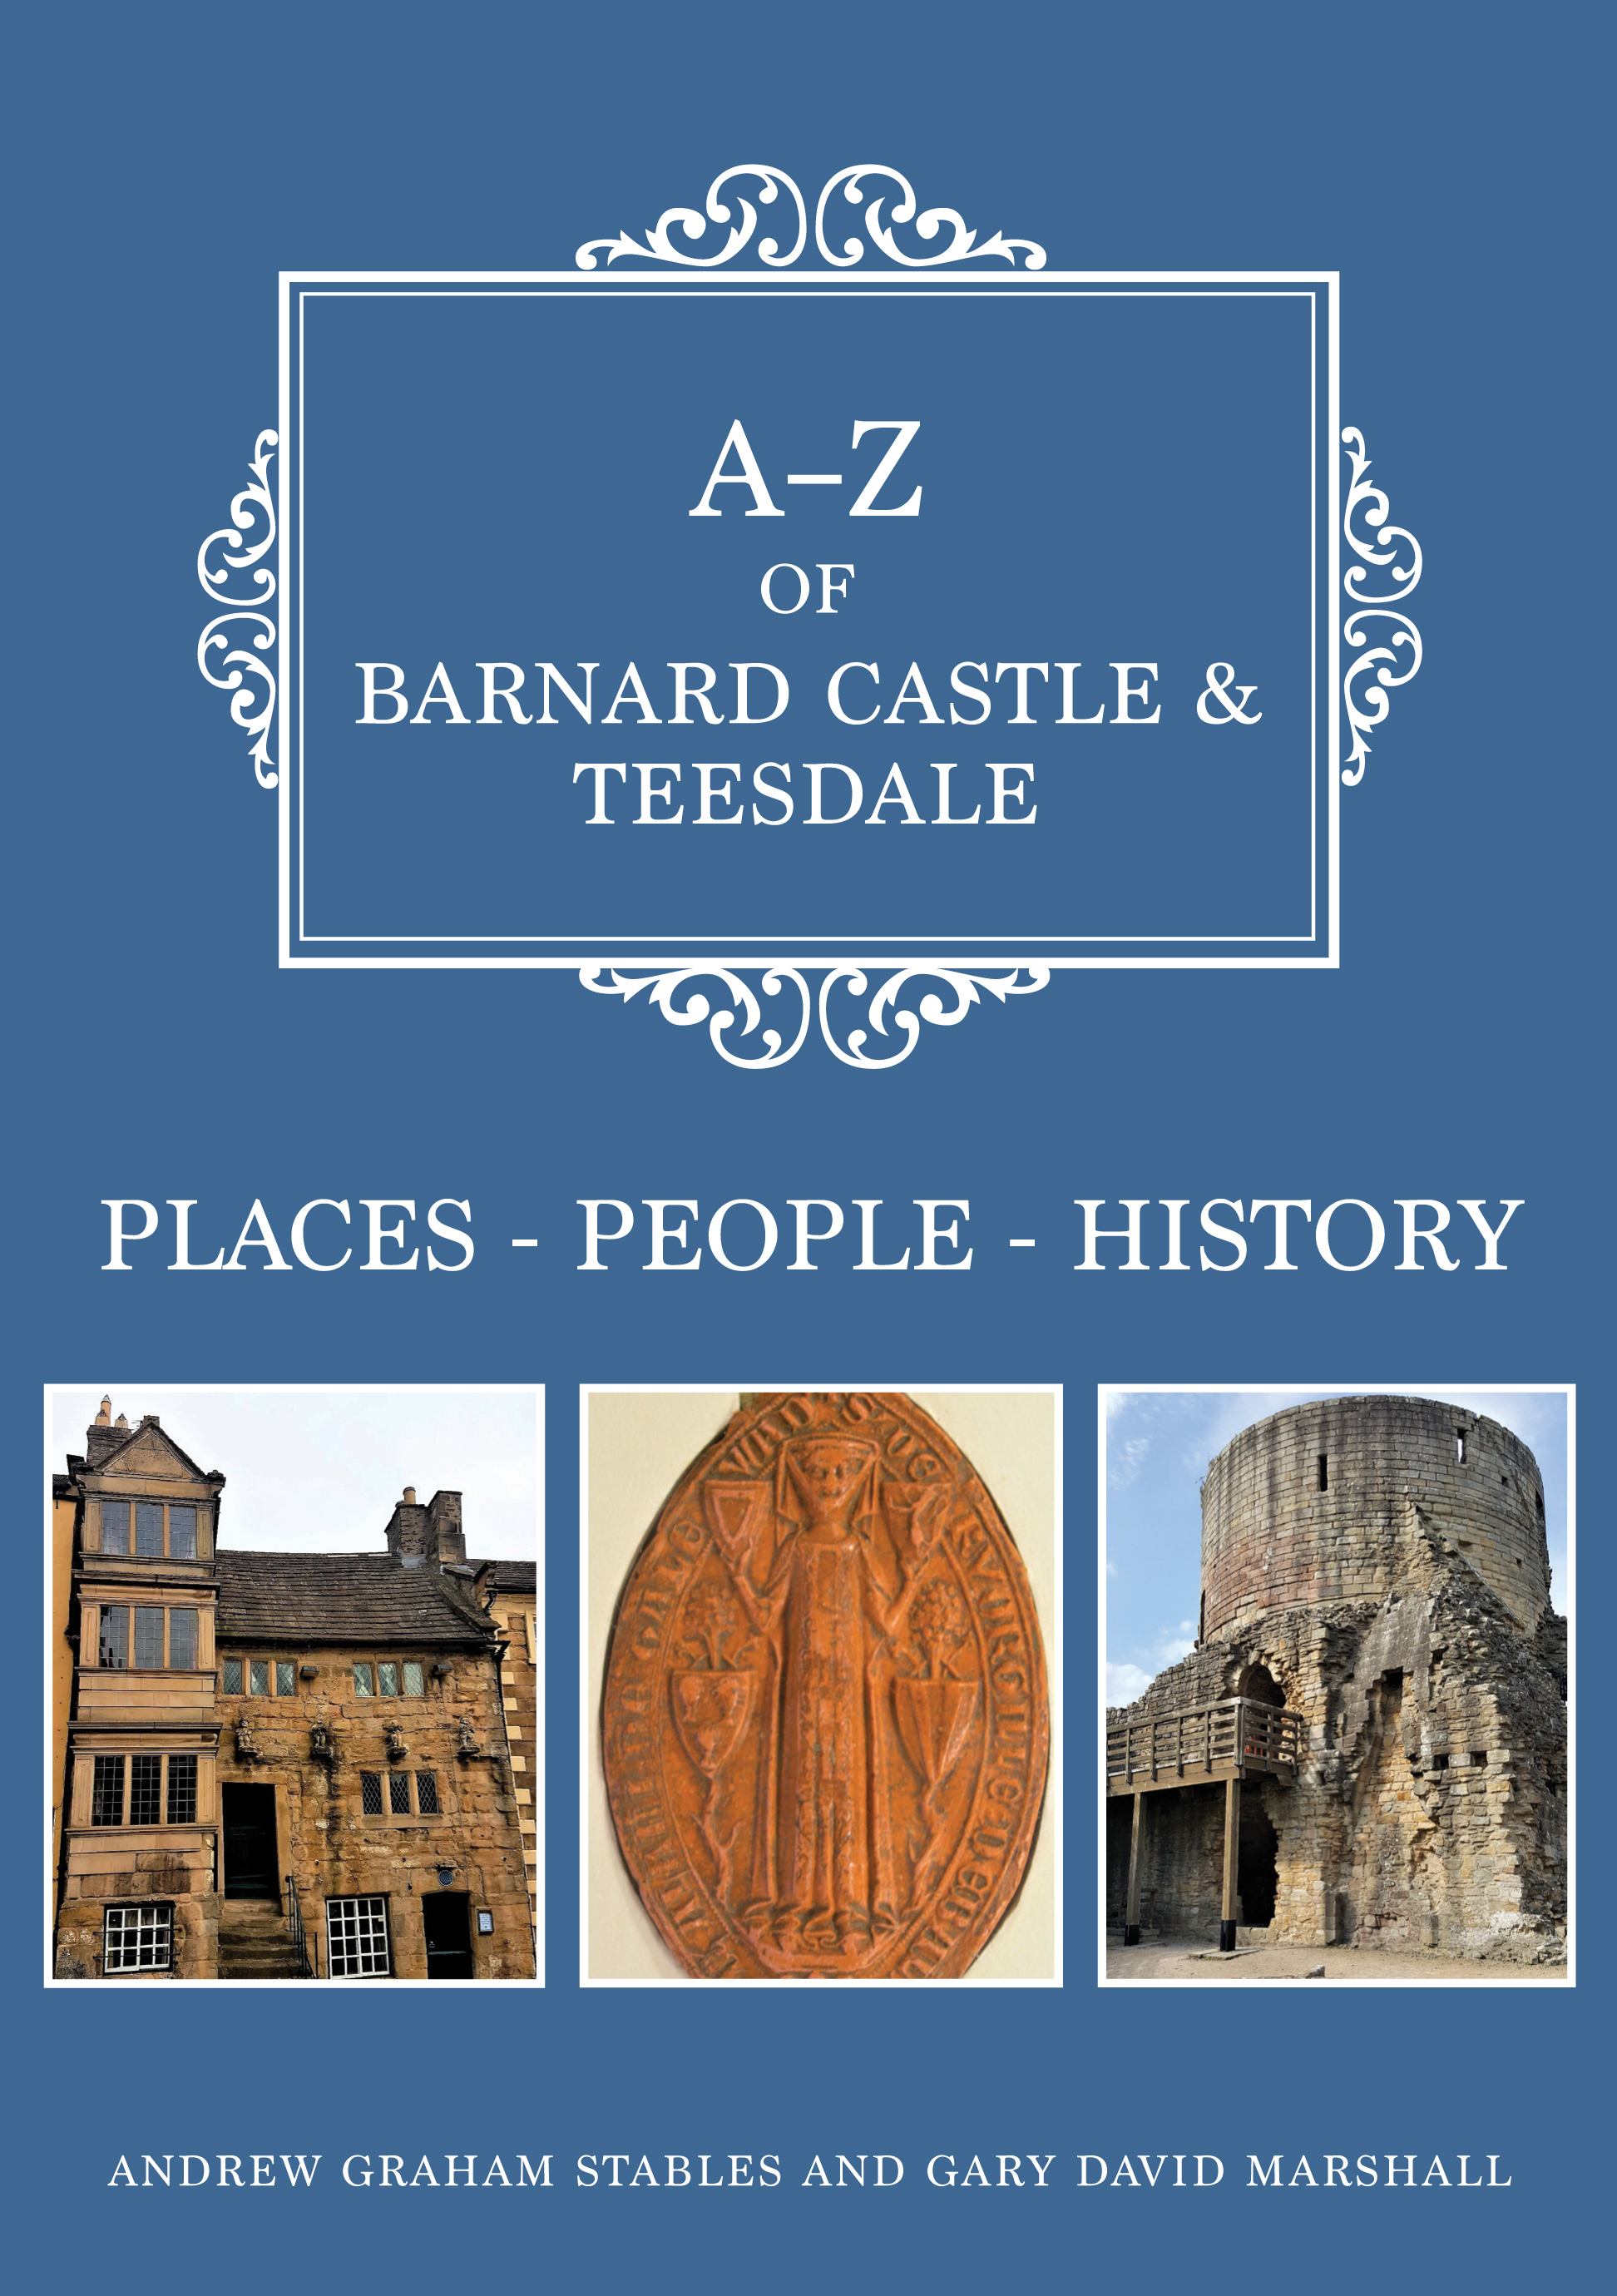 A to Z of Barnard Castle & Teesdale is published today